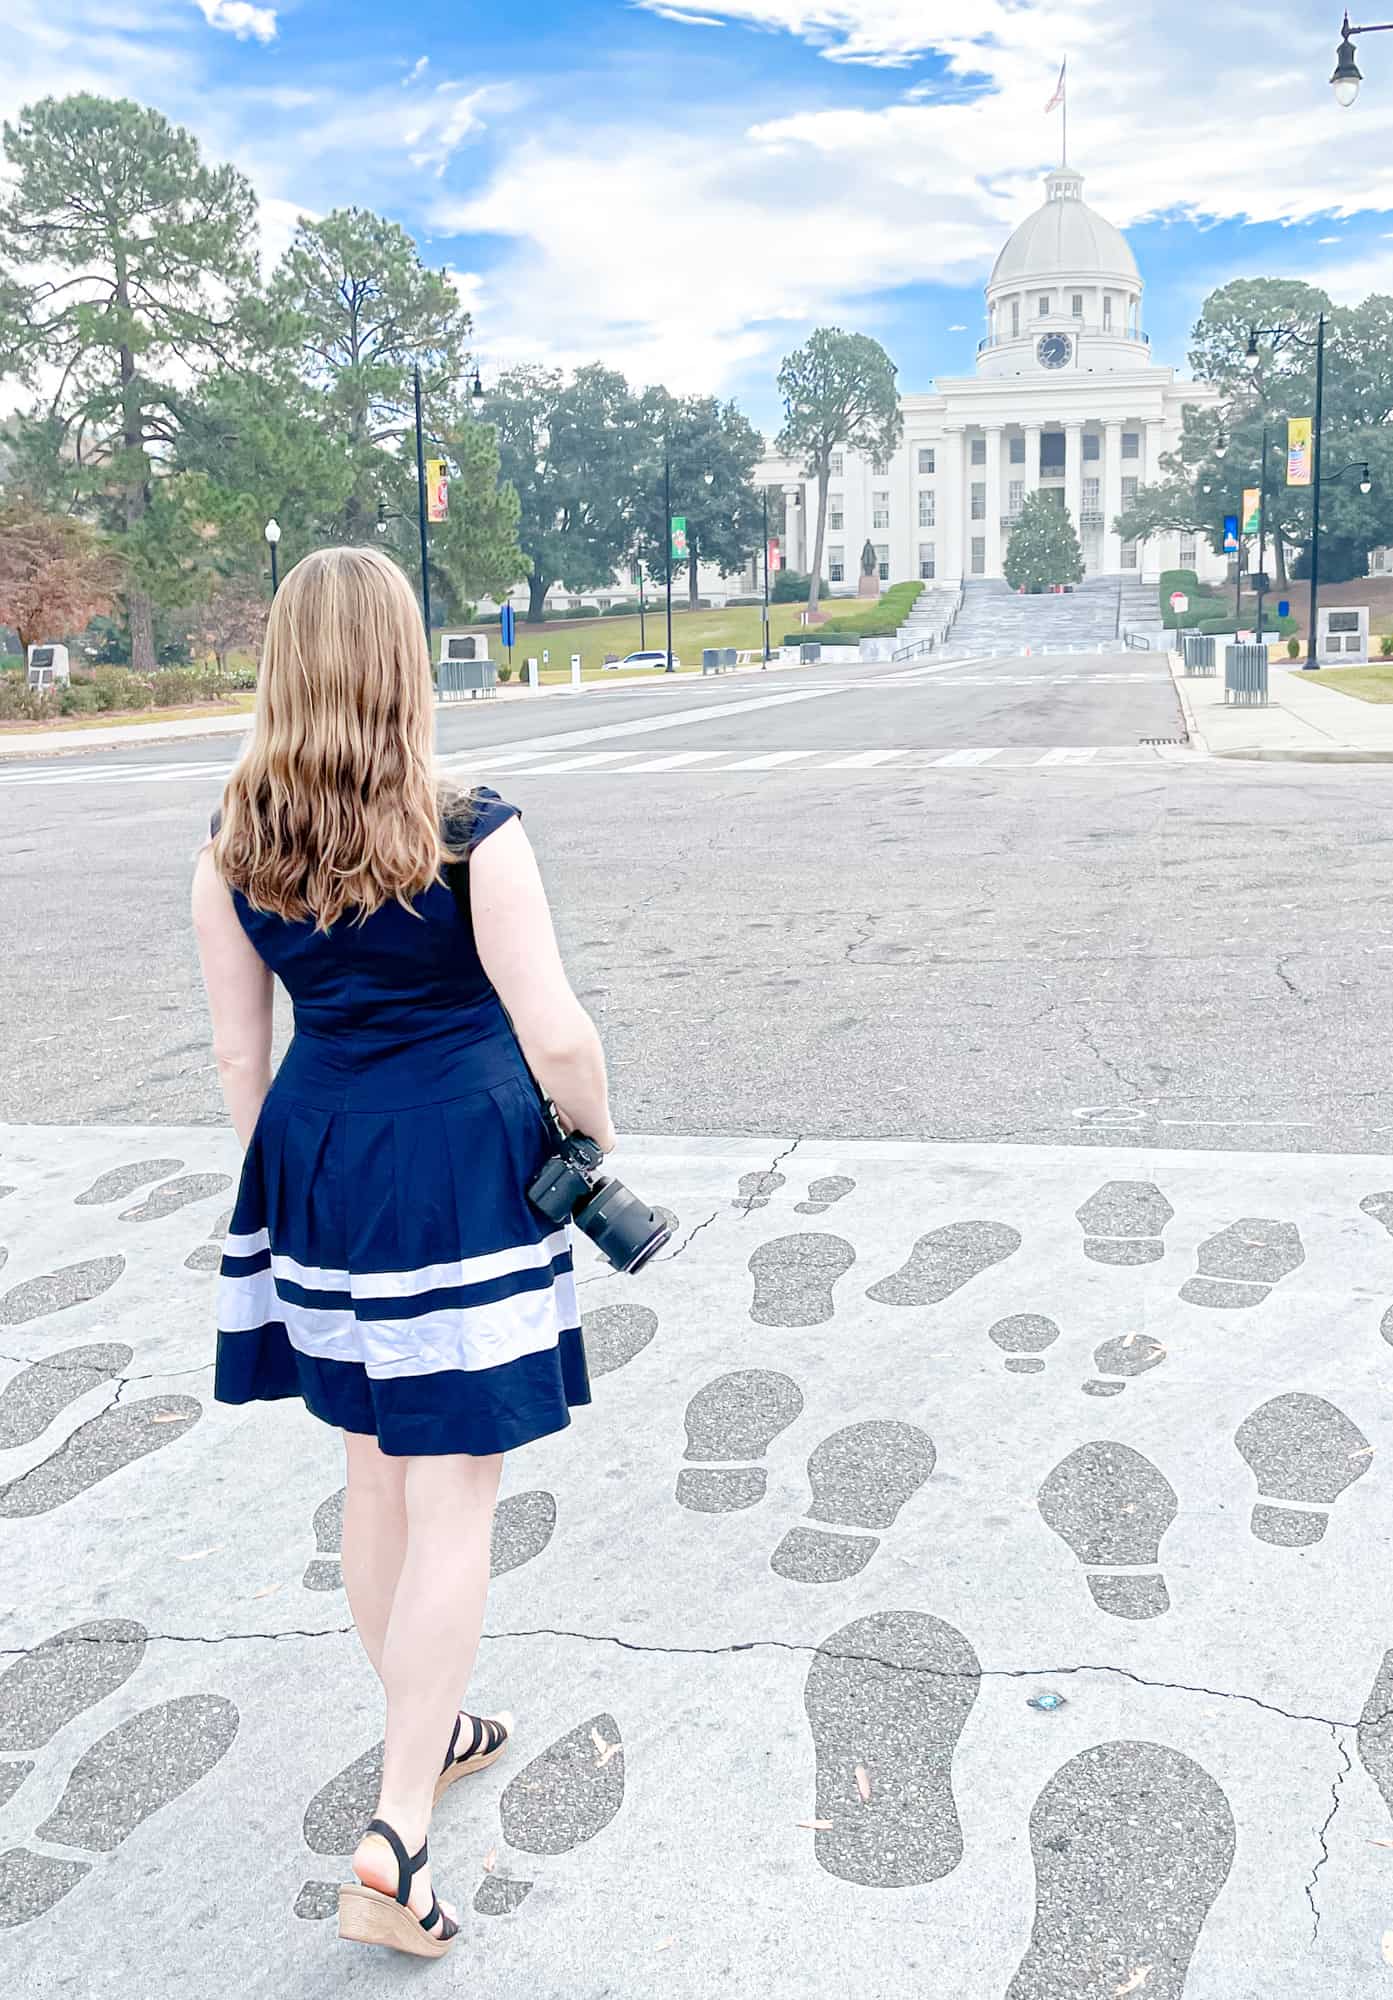 USA - Alabama - Montgomery - Footsteps approaching Capitol Building